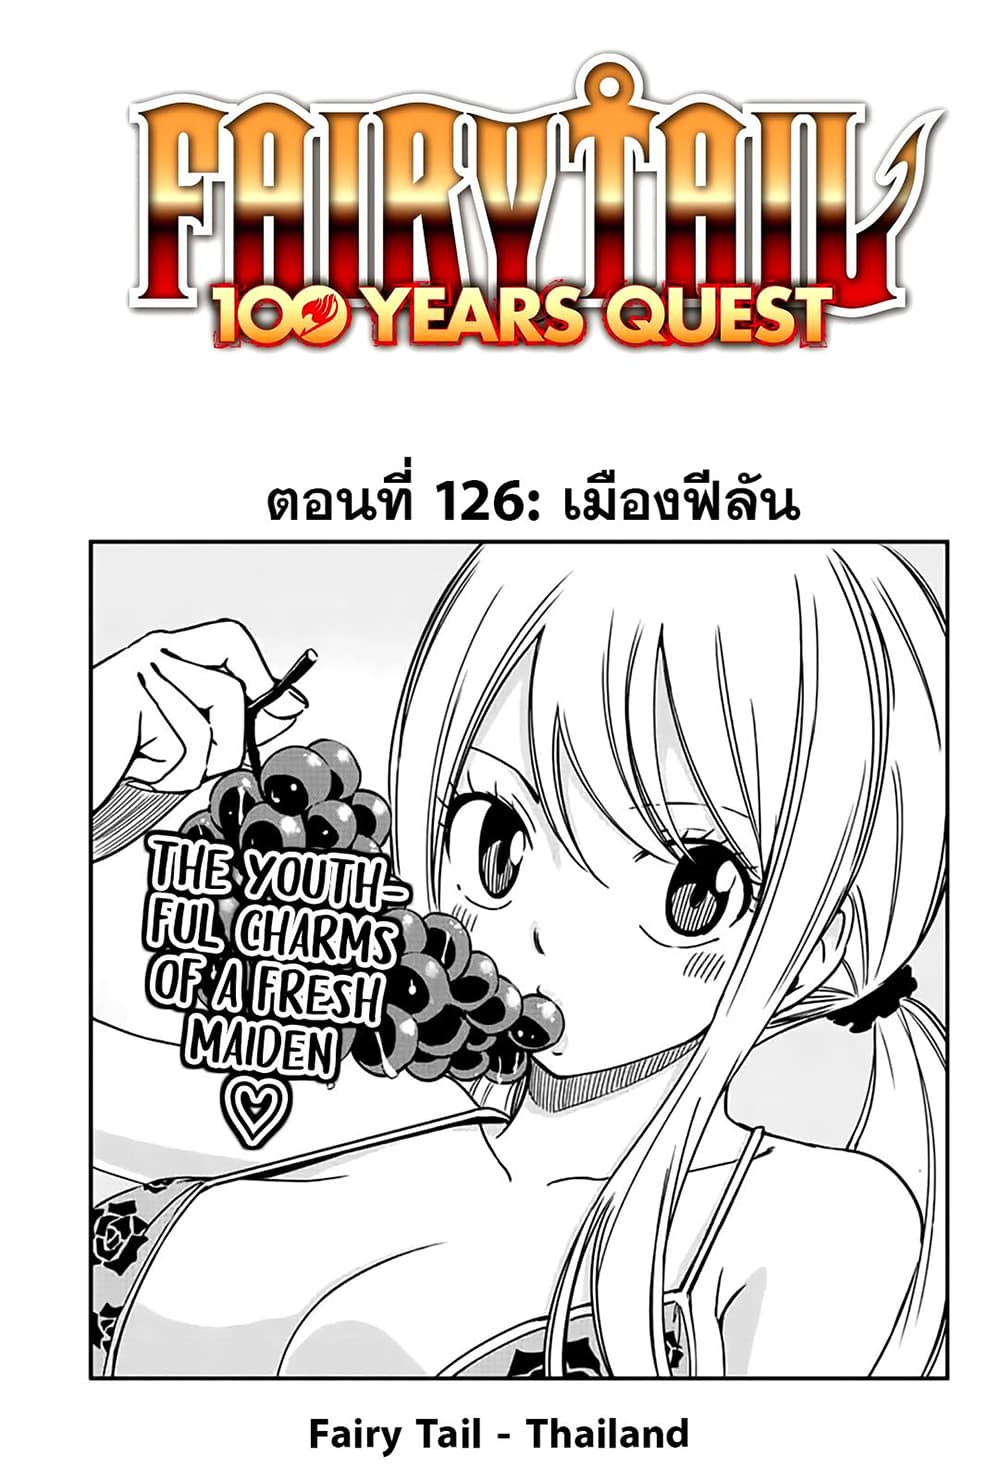 Fairy Tail 100 Years Quest à¸à¸­à¸à¸à¸µà¹ 126 (1)